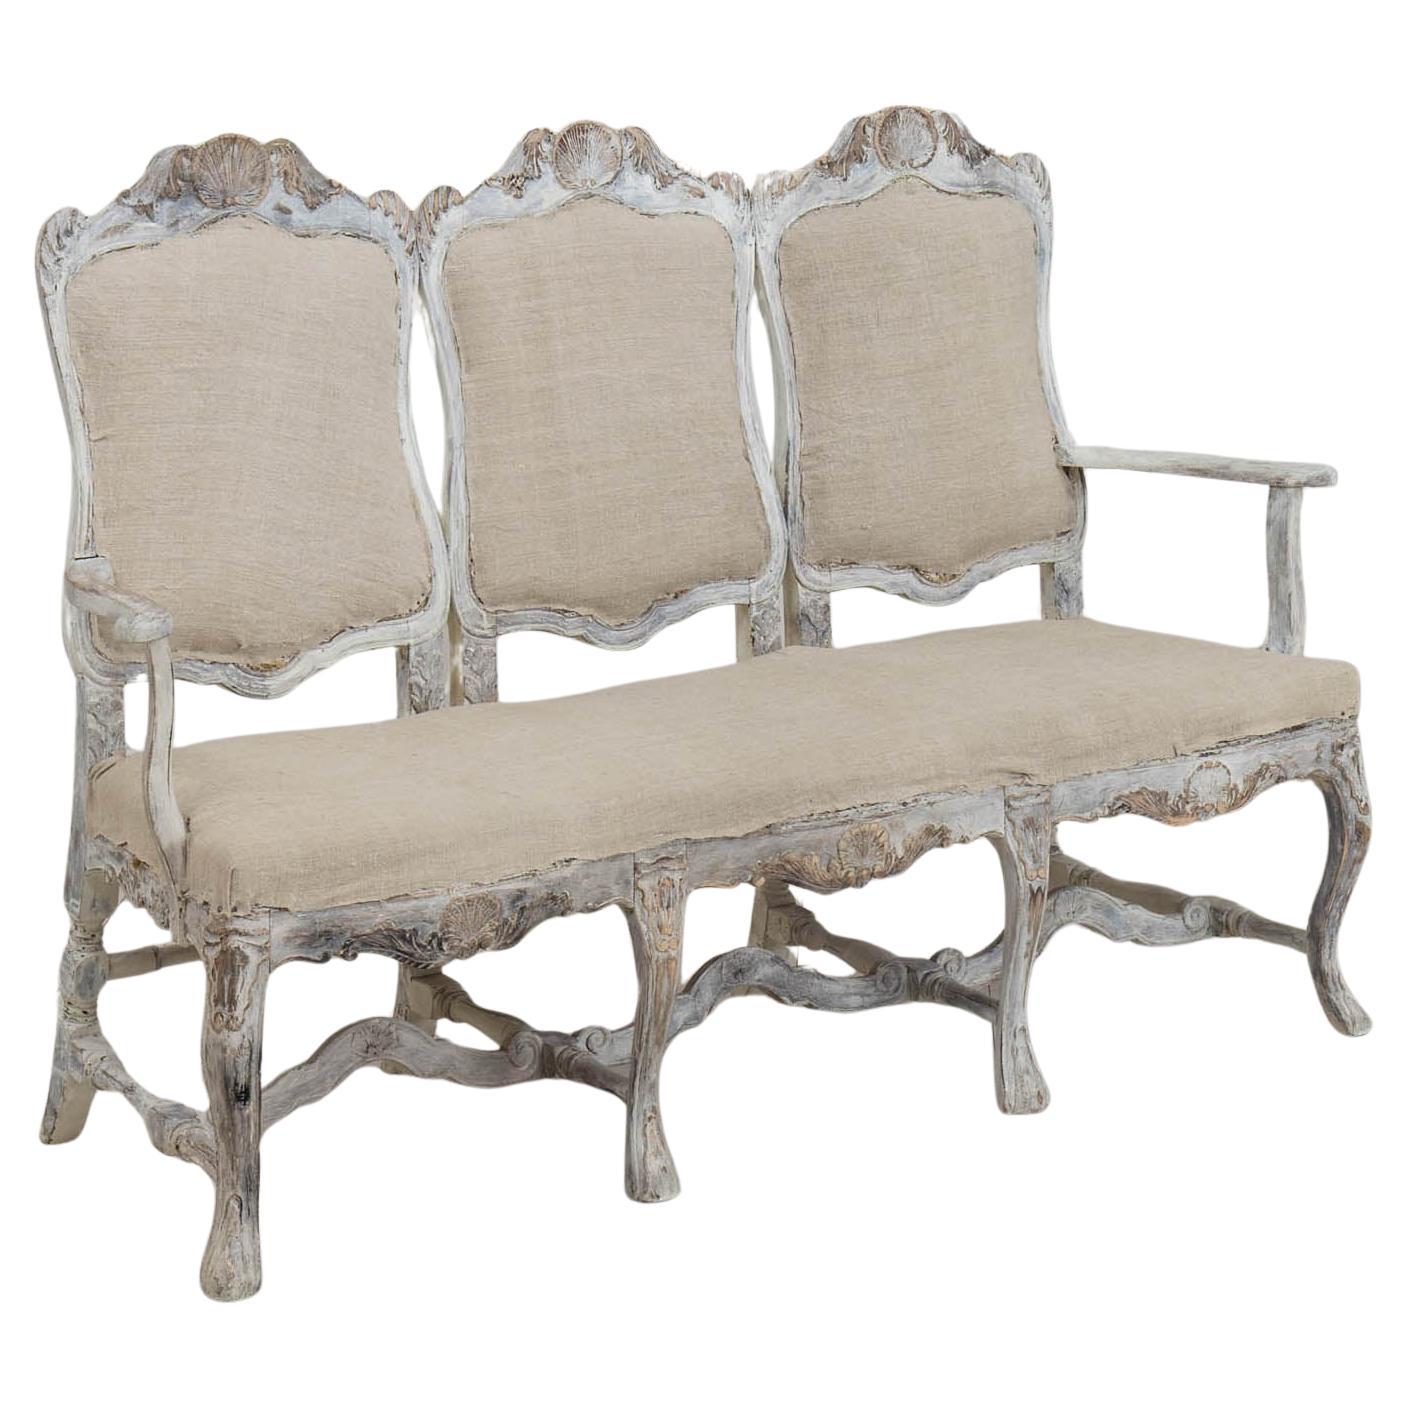 19th c. Swedish Rococo Settee or Sofa Bench in Original Paint For Sale